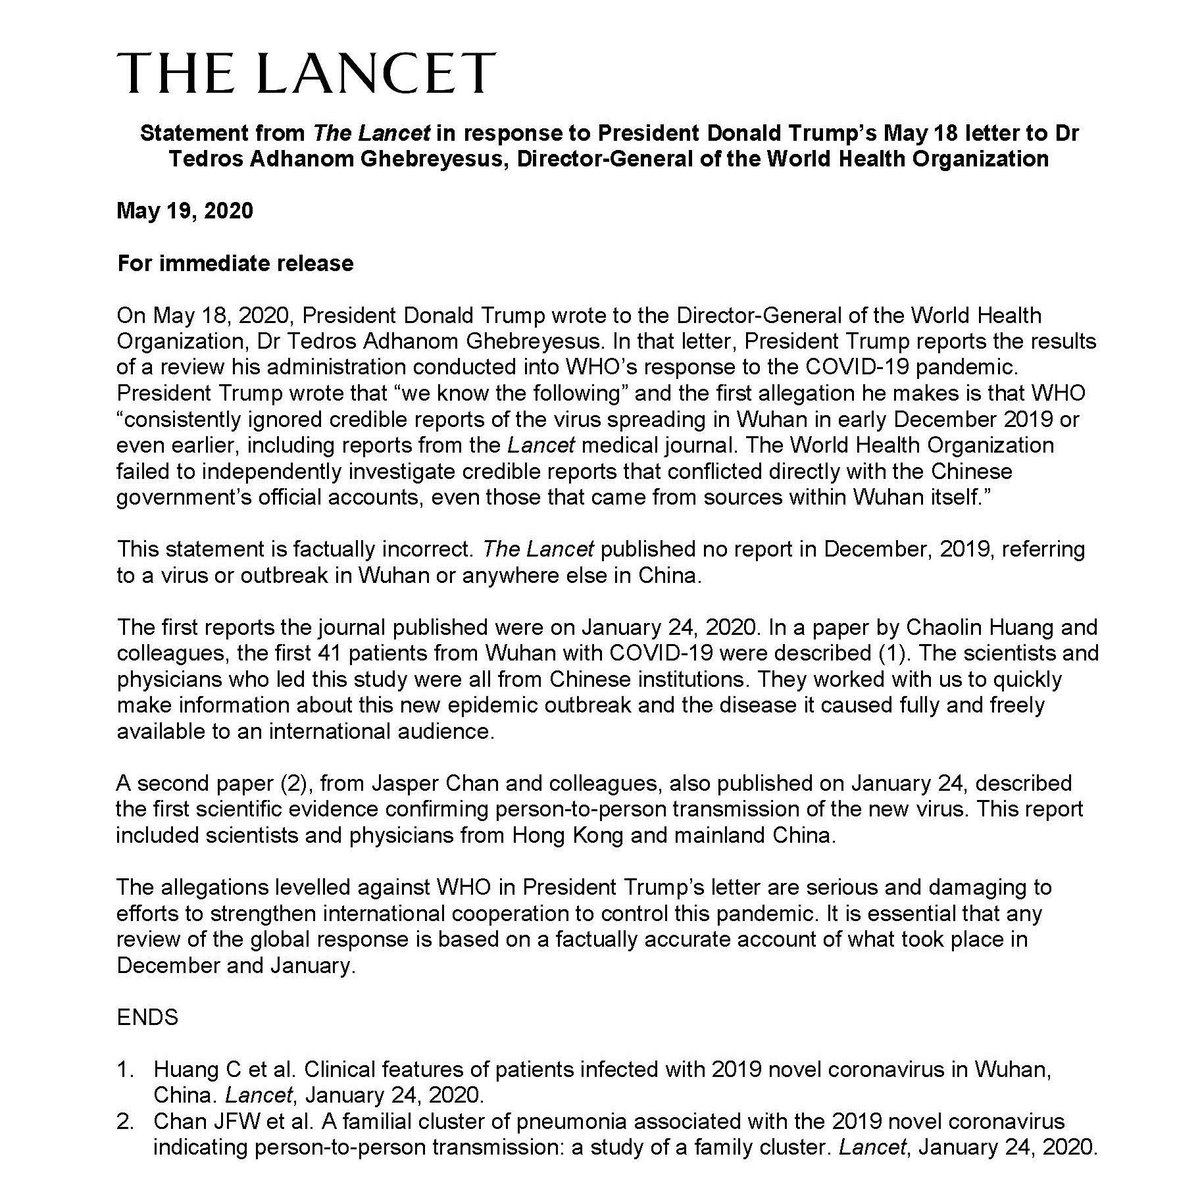 The game is on.A. Lancet: calls for the global review of the COVID19 response to be based on a factually a curate account. 